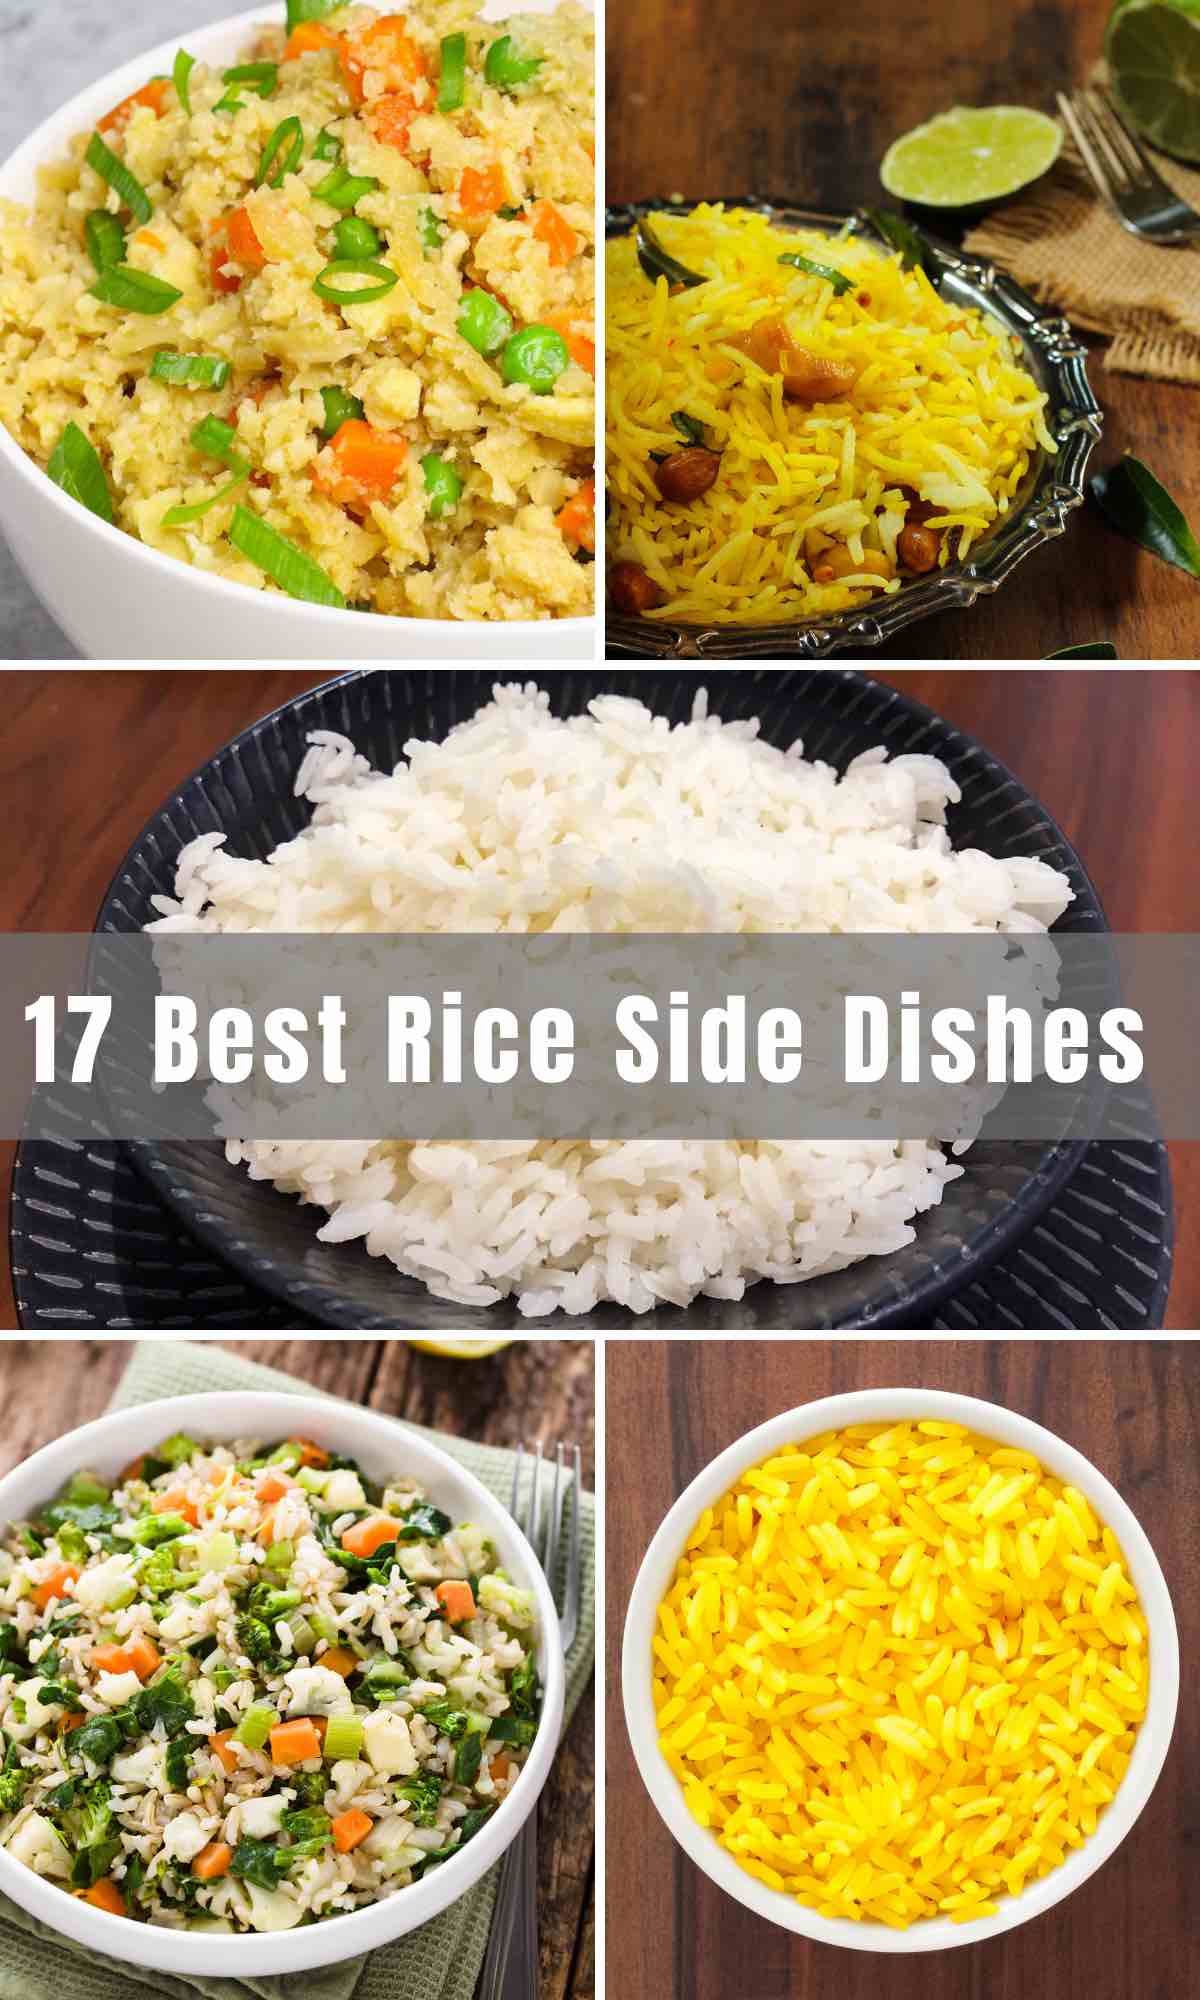 As a side dish, rice can be the perfect finishing touch for almost any meal. This versatile carb can be seasoned, spiced, and combined with other ingredients for exciting and interesting meals. Get inspired with these 17 delicious and unique Rice Side Dishes for pork, chicken, fish, and more!